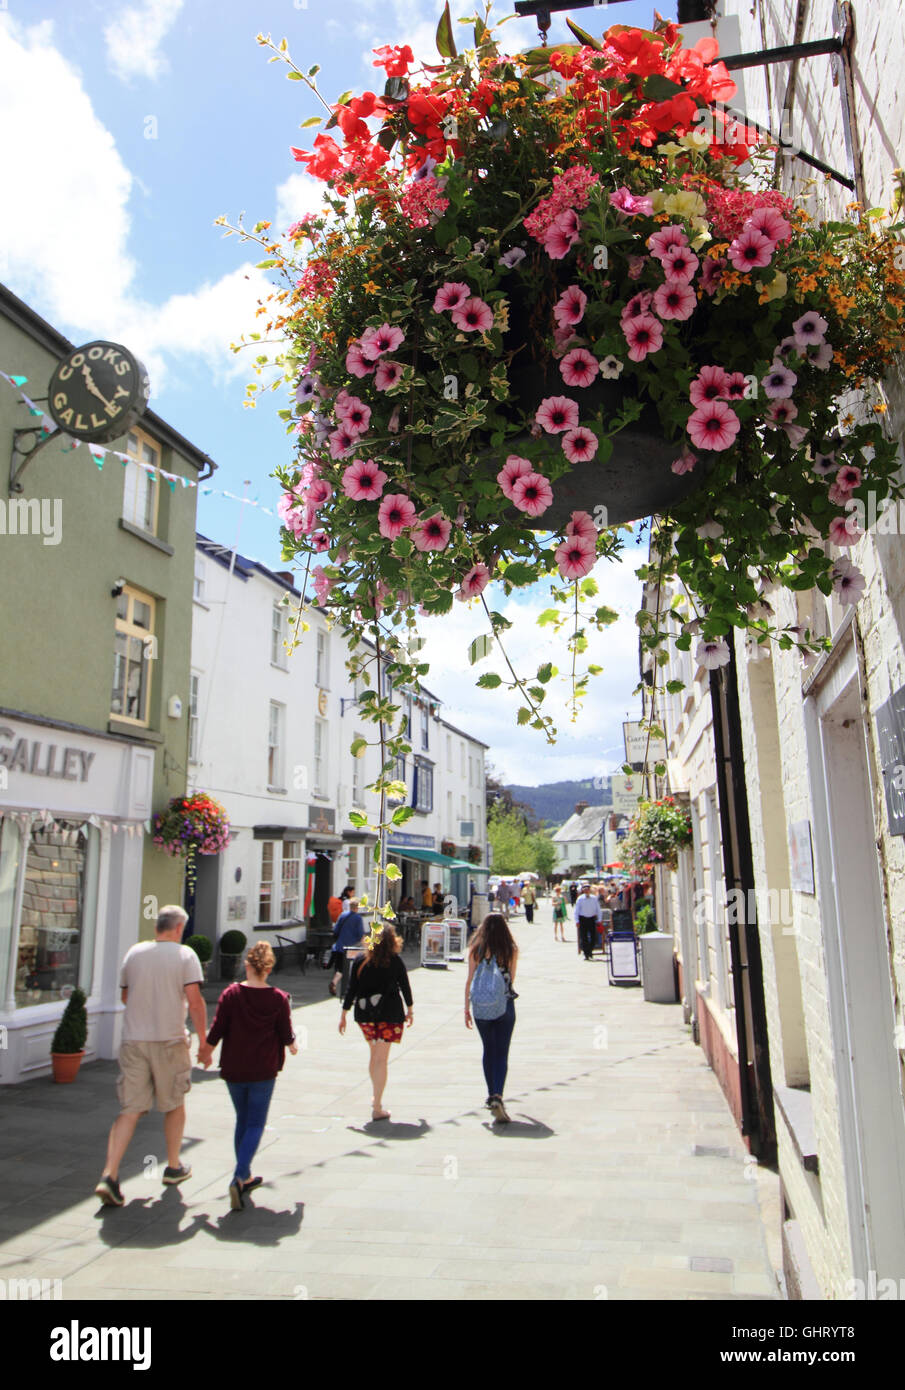 Flannel Street in Abergavenny town centre, Abergavenny, Monmouthshire, South Wales  - summer Stock Photo